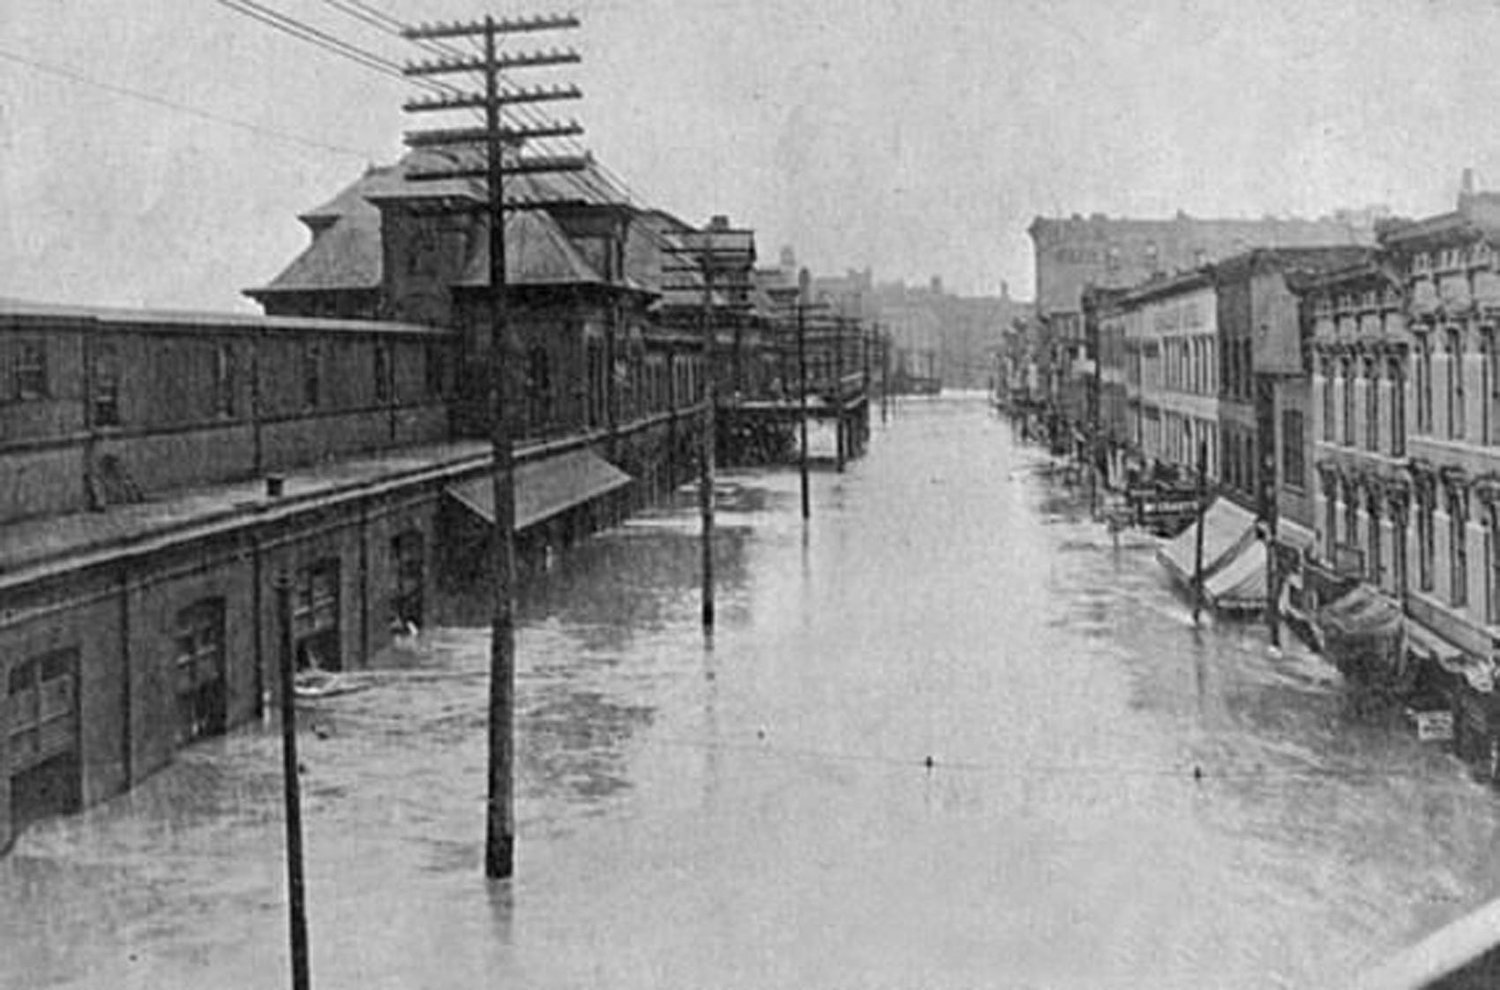 1903 Kansas City Flood. Looking south on Union Avenue, Union Depot to the left.